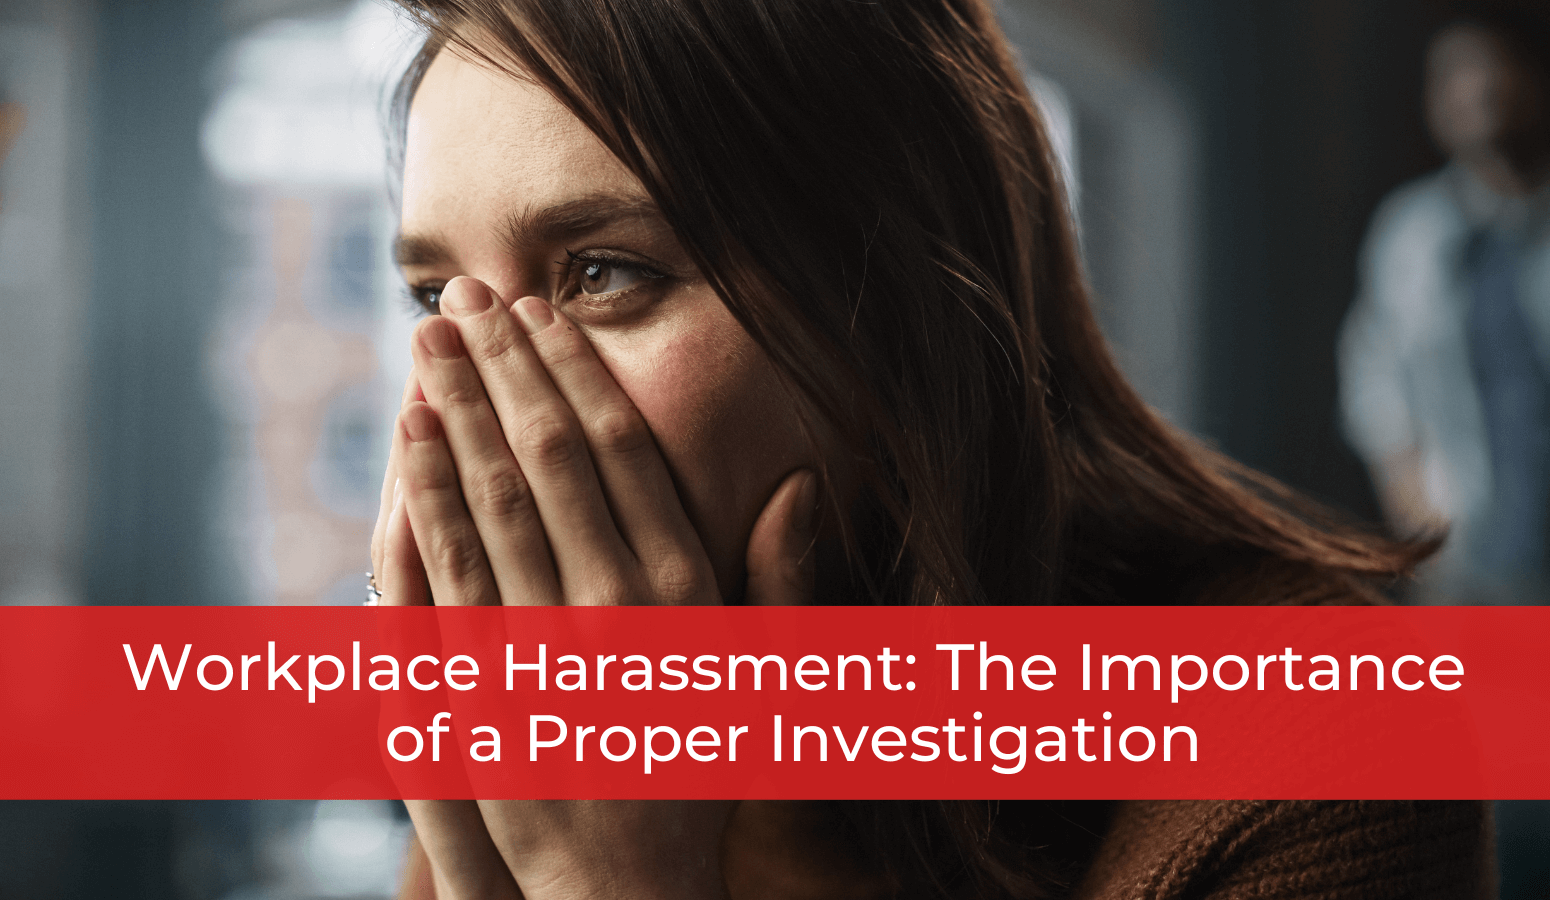 Featured image for “Workplace Harassment: The Importance of a Proper Investigation”